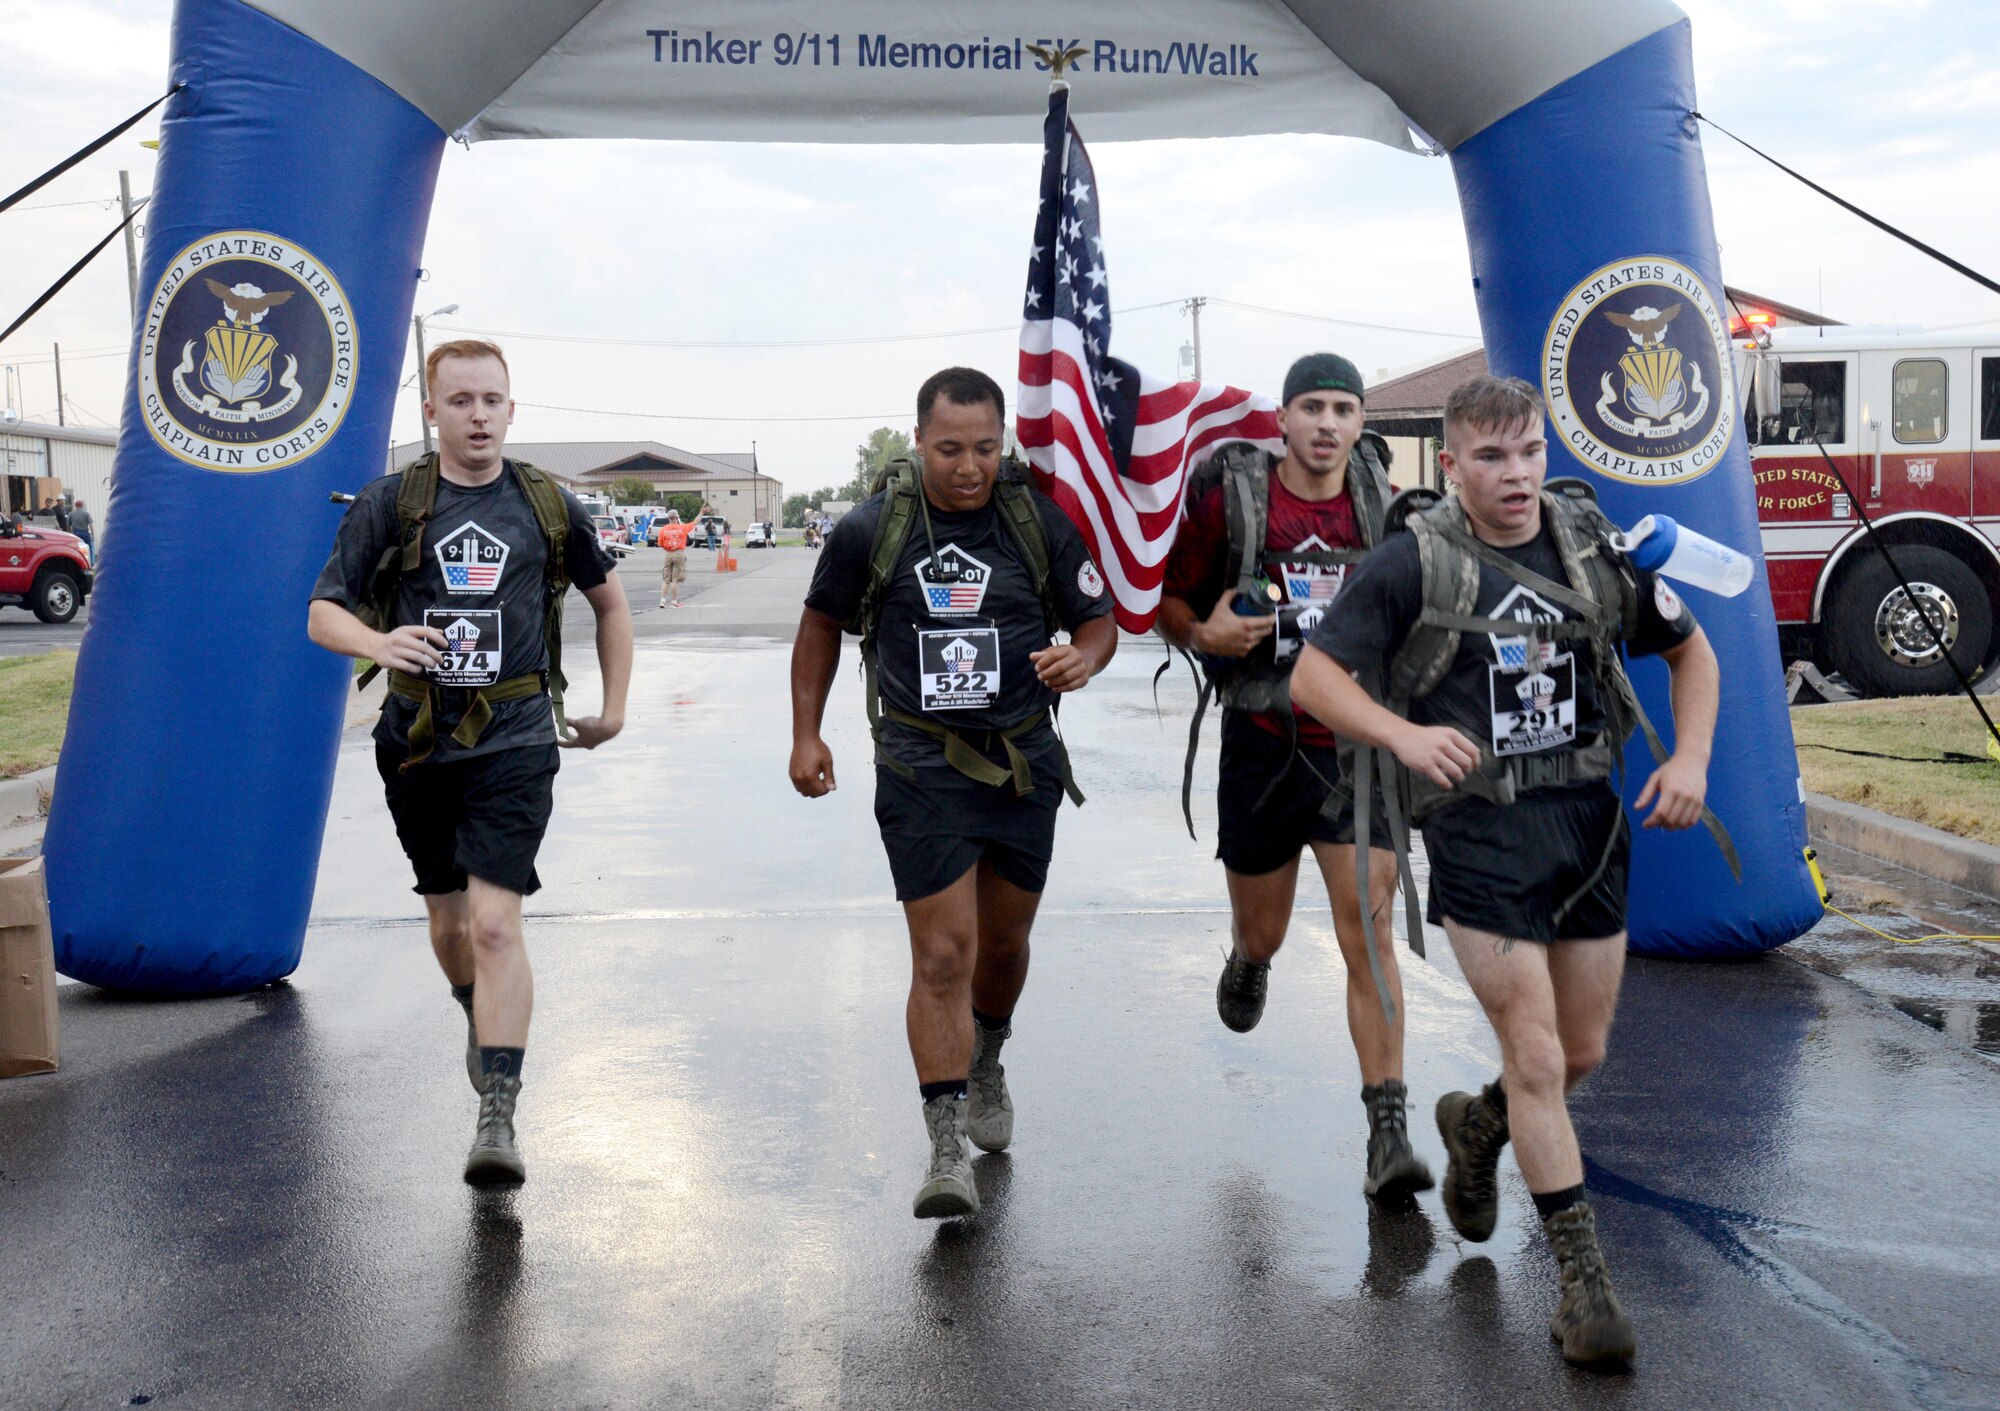 From left, Airman 1st Class Gilbert Devon, Airman 1st Class Toris Richardson, Airman 1st Class Maasry Ryan and Airman 1st Class David Sheppard, all with the 552nd Aircraft Maintenance Squadron, ran the 5K portion of the 2nd Annual Run to Remember 9-11 as a team. This year’s theme for 9-11 memorial events was “United, Remember, Defend”. (Air Force photo by Kelly White)